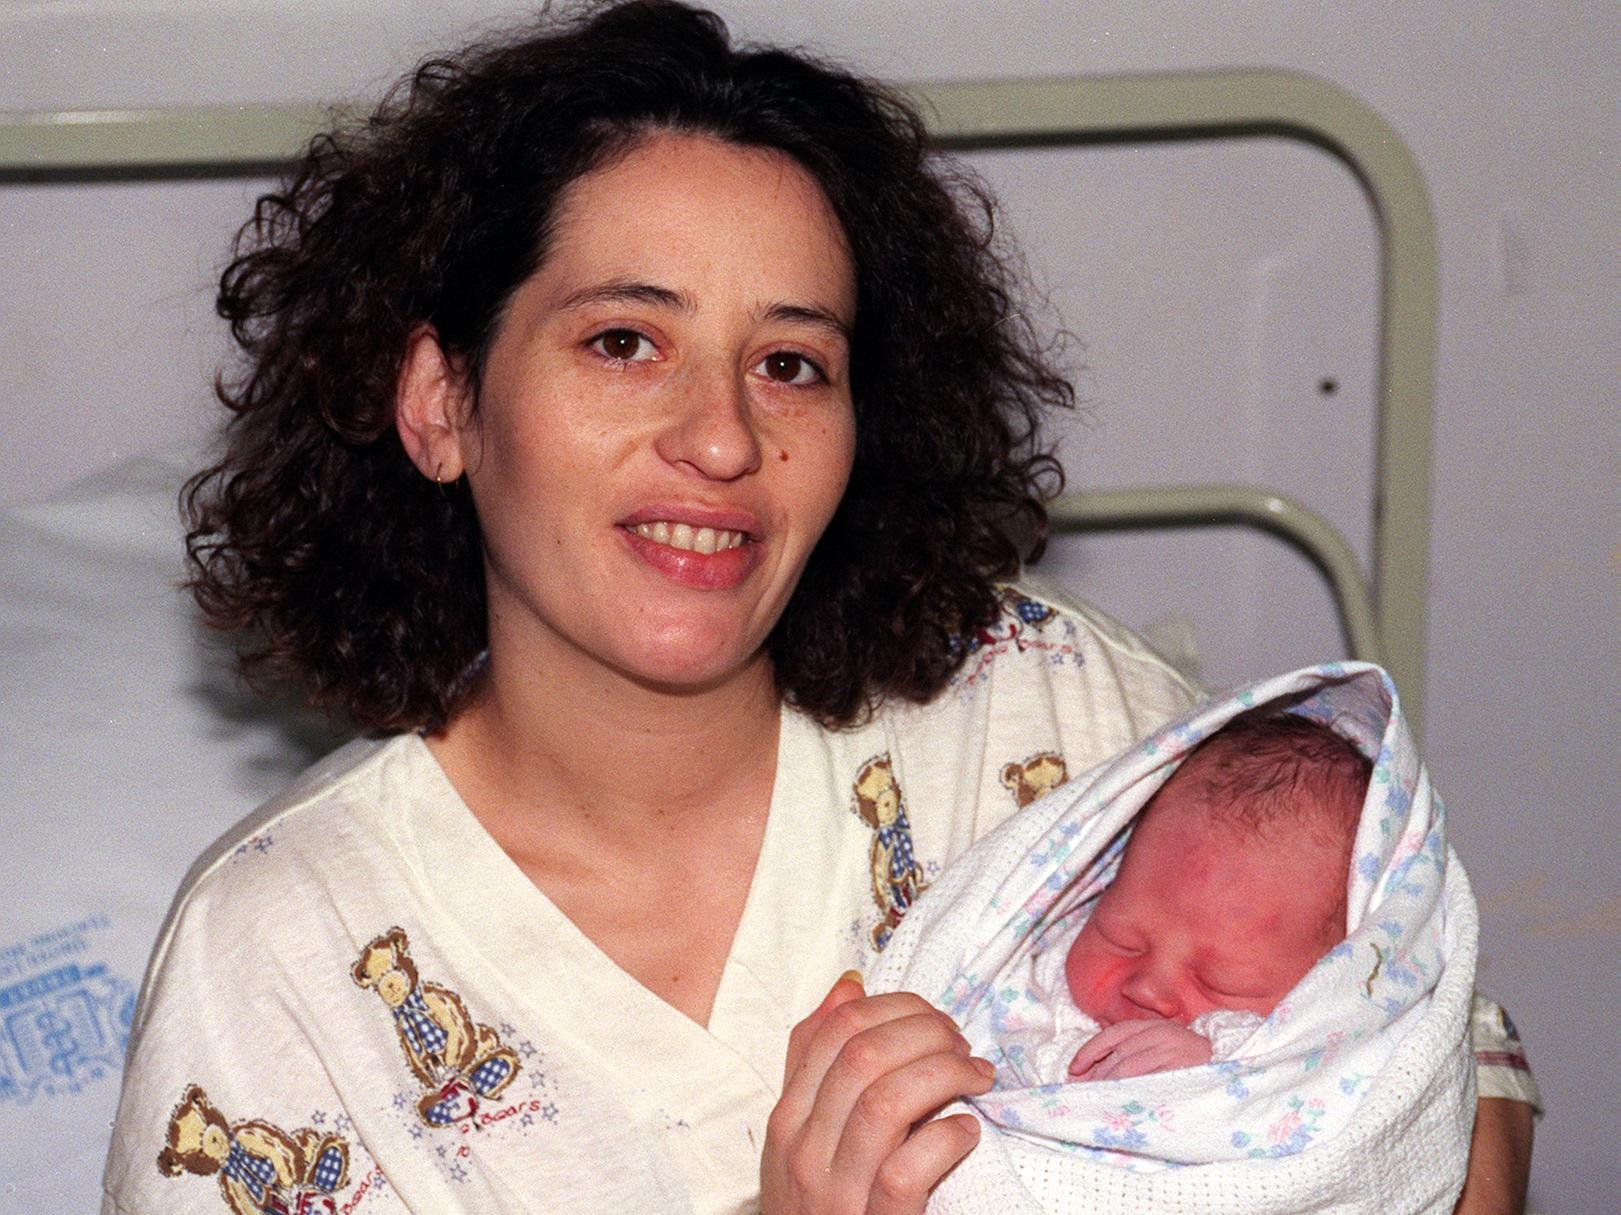 This bundle of joy was the first new born of 1999 at Leeds General Infirmary. Baby Sam, pictured with mum Samantha Cooper, arrived weighing 7lbs 10ozs.